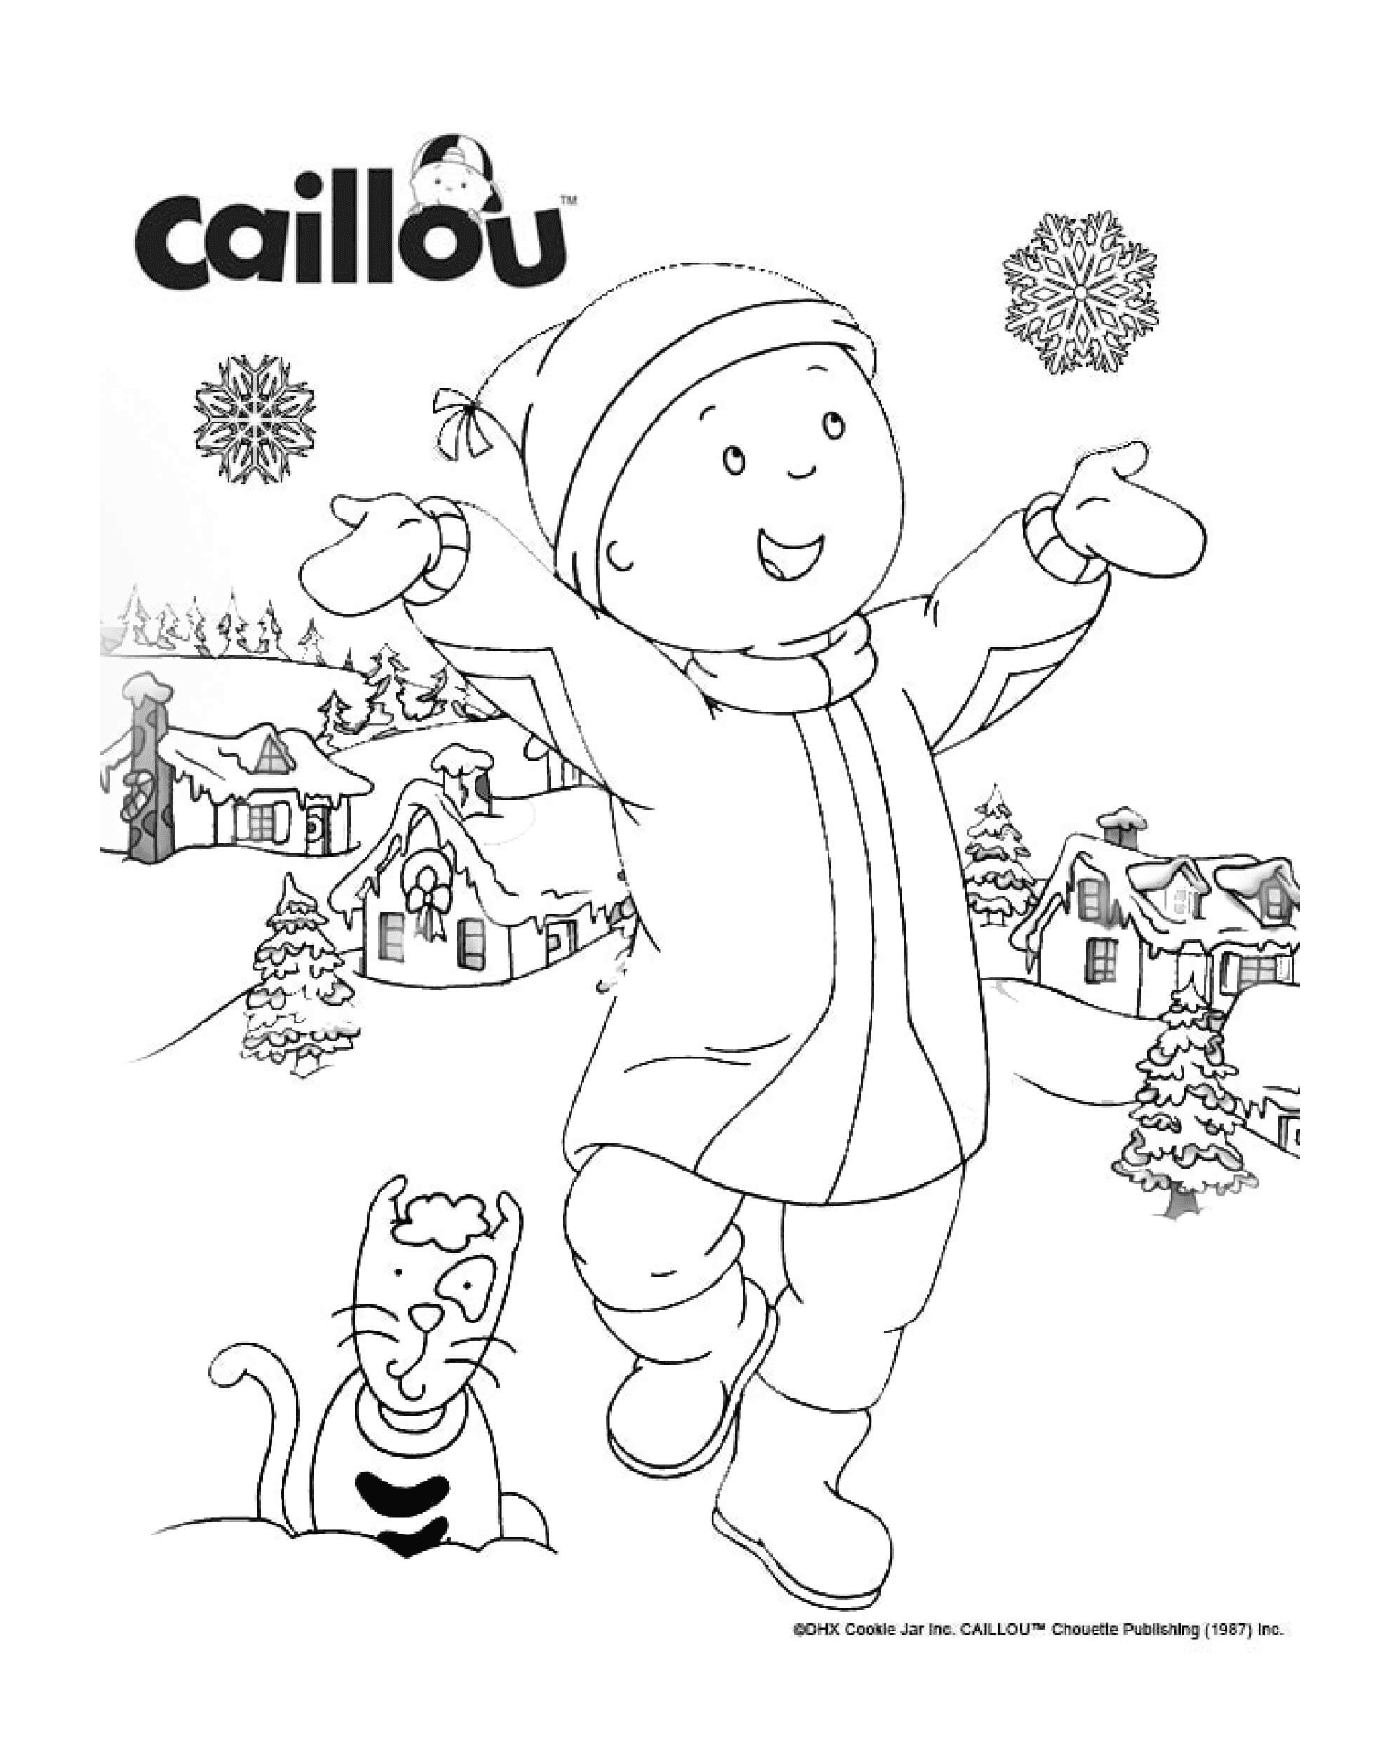  Christmas approaches with Gilbert and Caillou who love snowflakes 